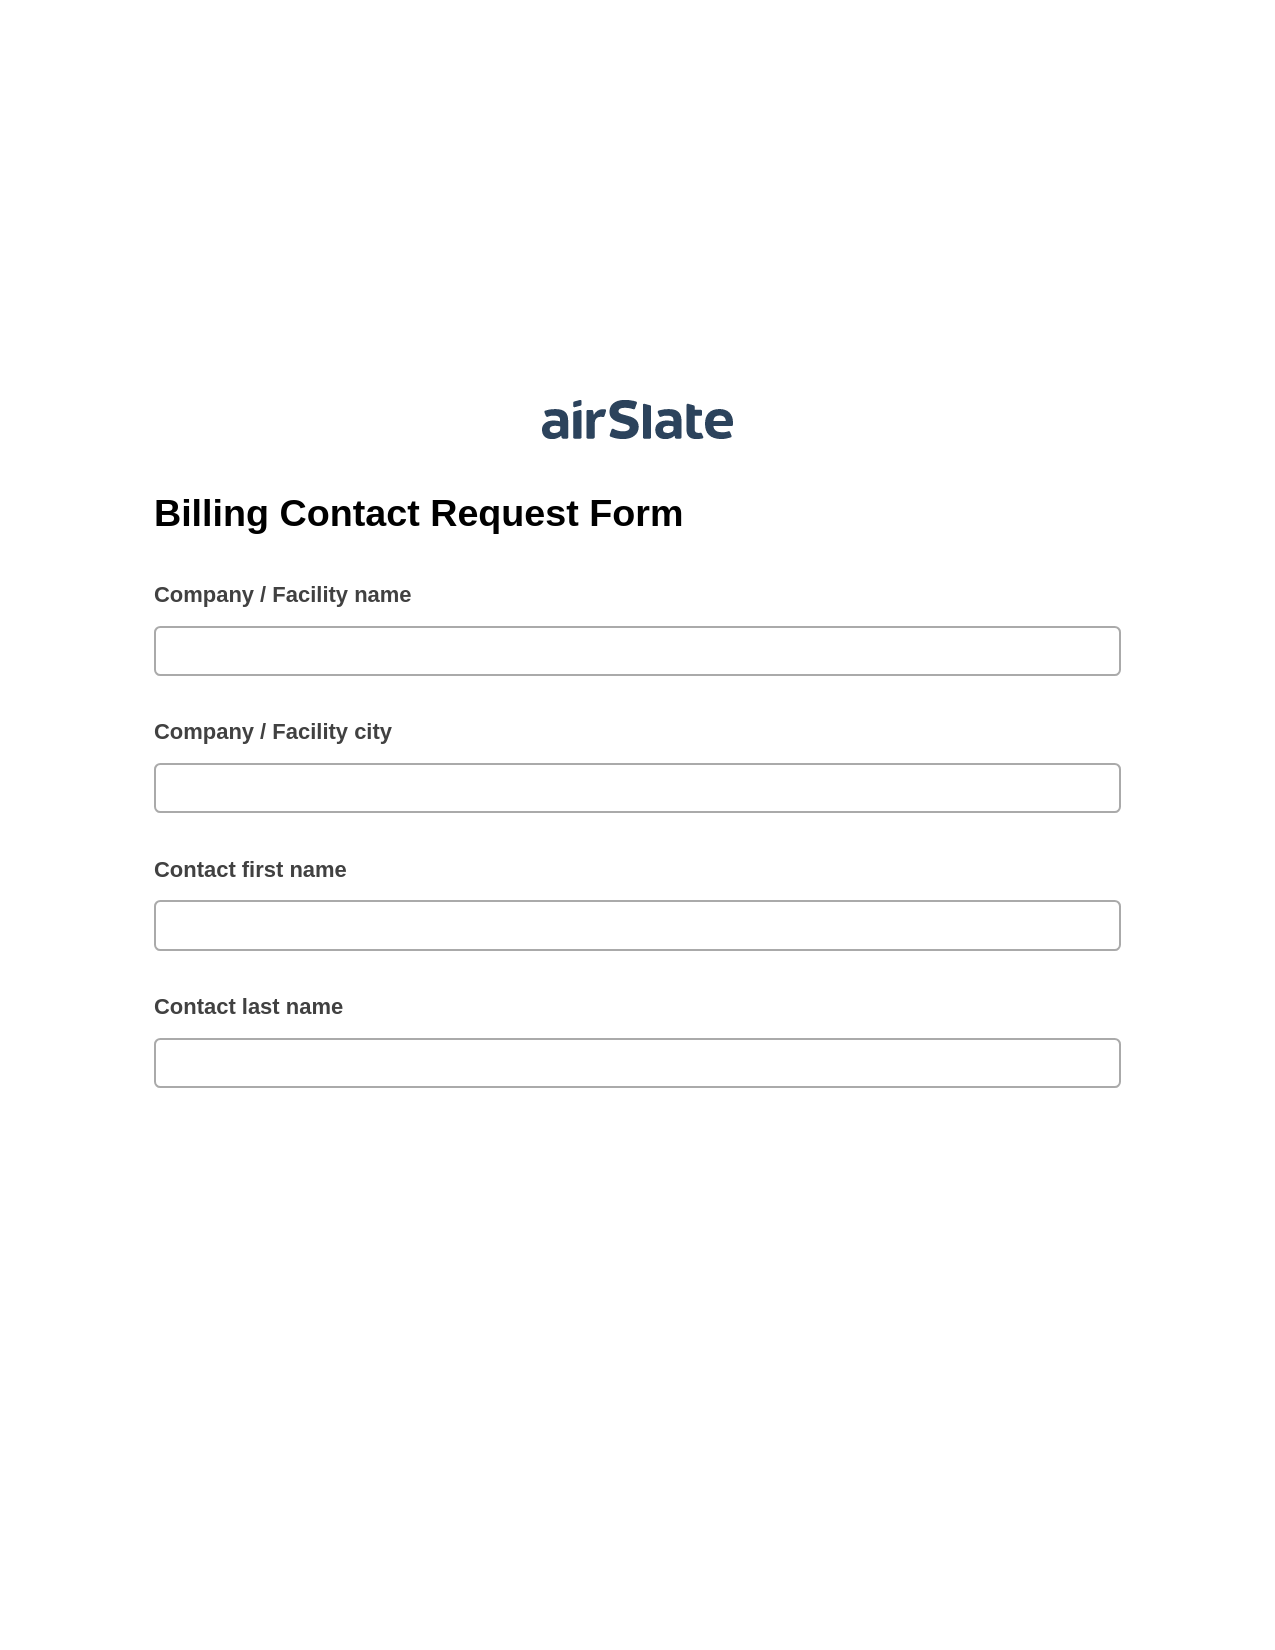 Multirole Billing Contact Request Form Pre-fill Dropdowns from CSV File Bot, Remove Slate Bot, Email Notification Postfinish Bot